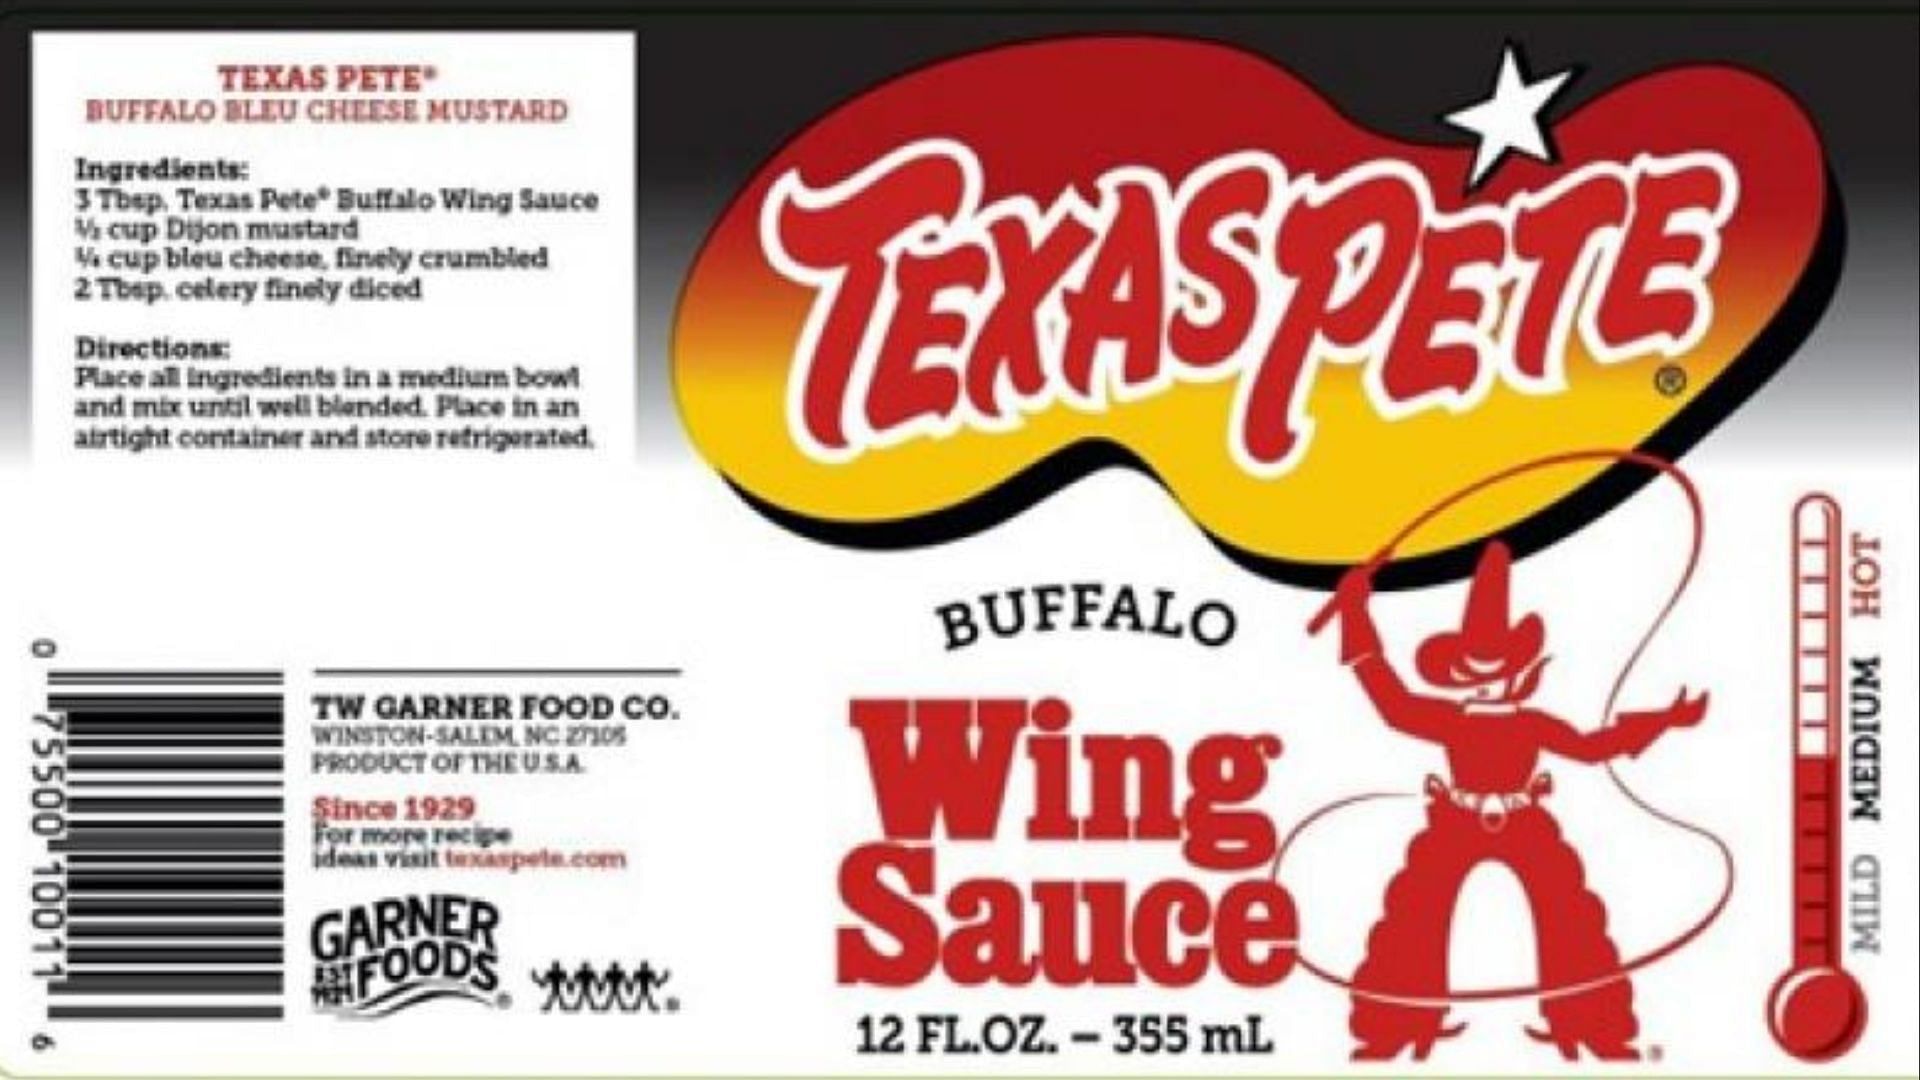 The recalled bottles of Texas Pete Buffalo Wing Sauce may contain undeclared soy allergens (Image via FDA)